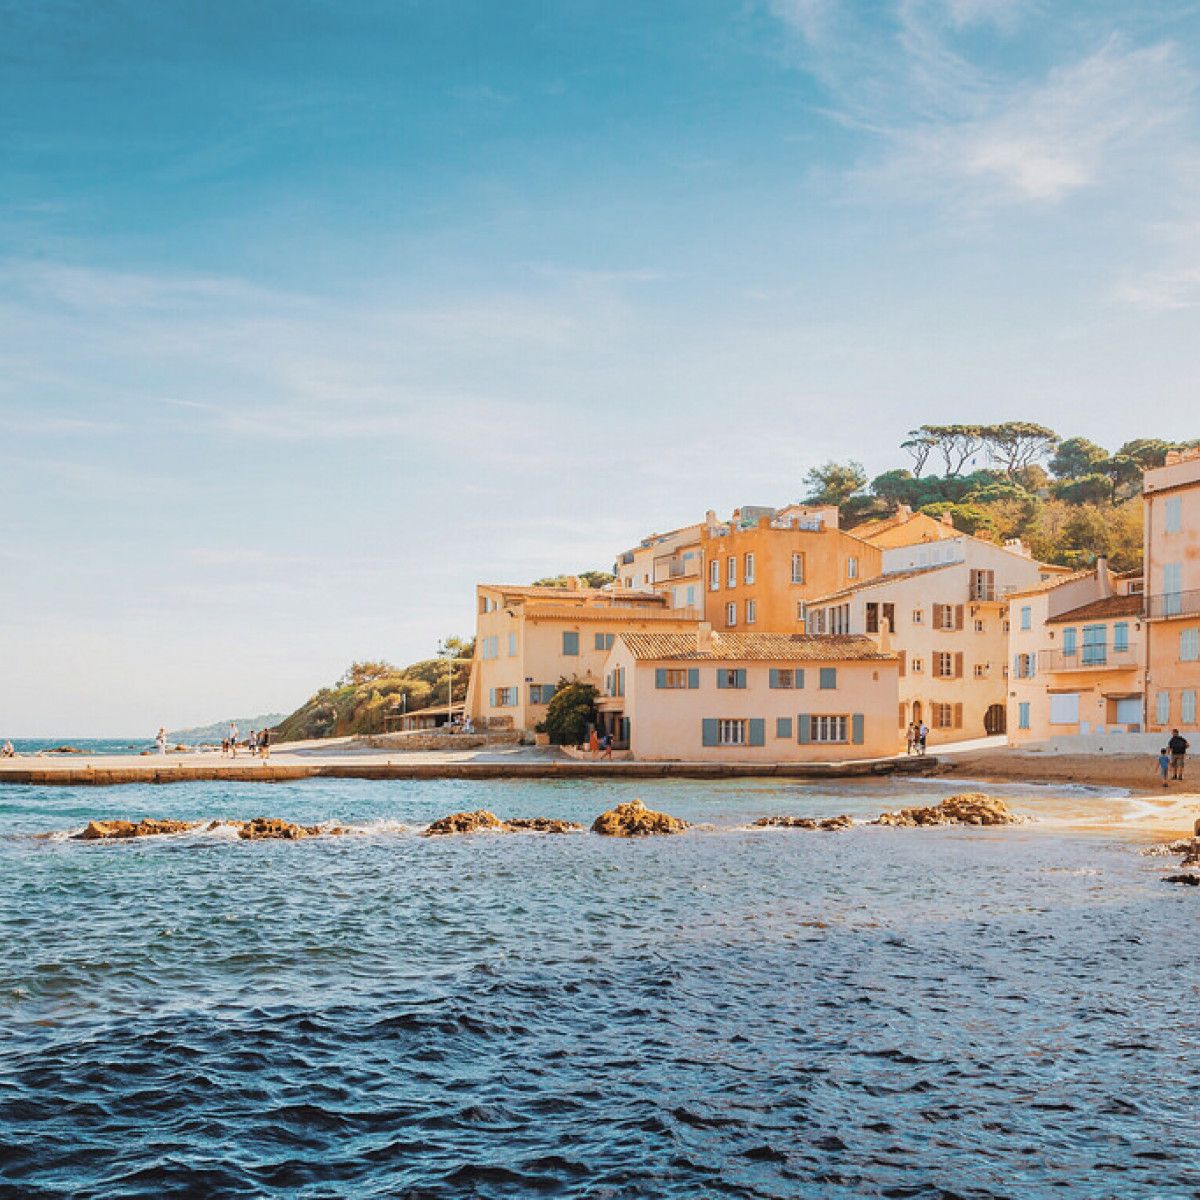 Will Pampelonne Beach St Tropez Ever Rule the World?